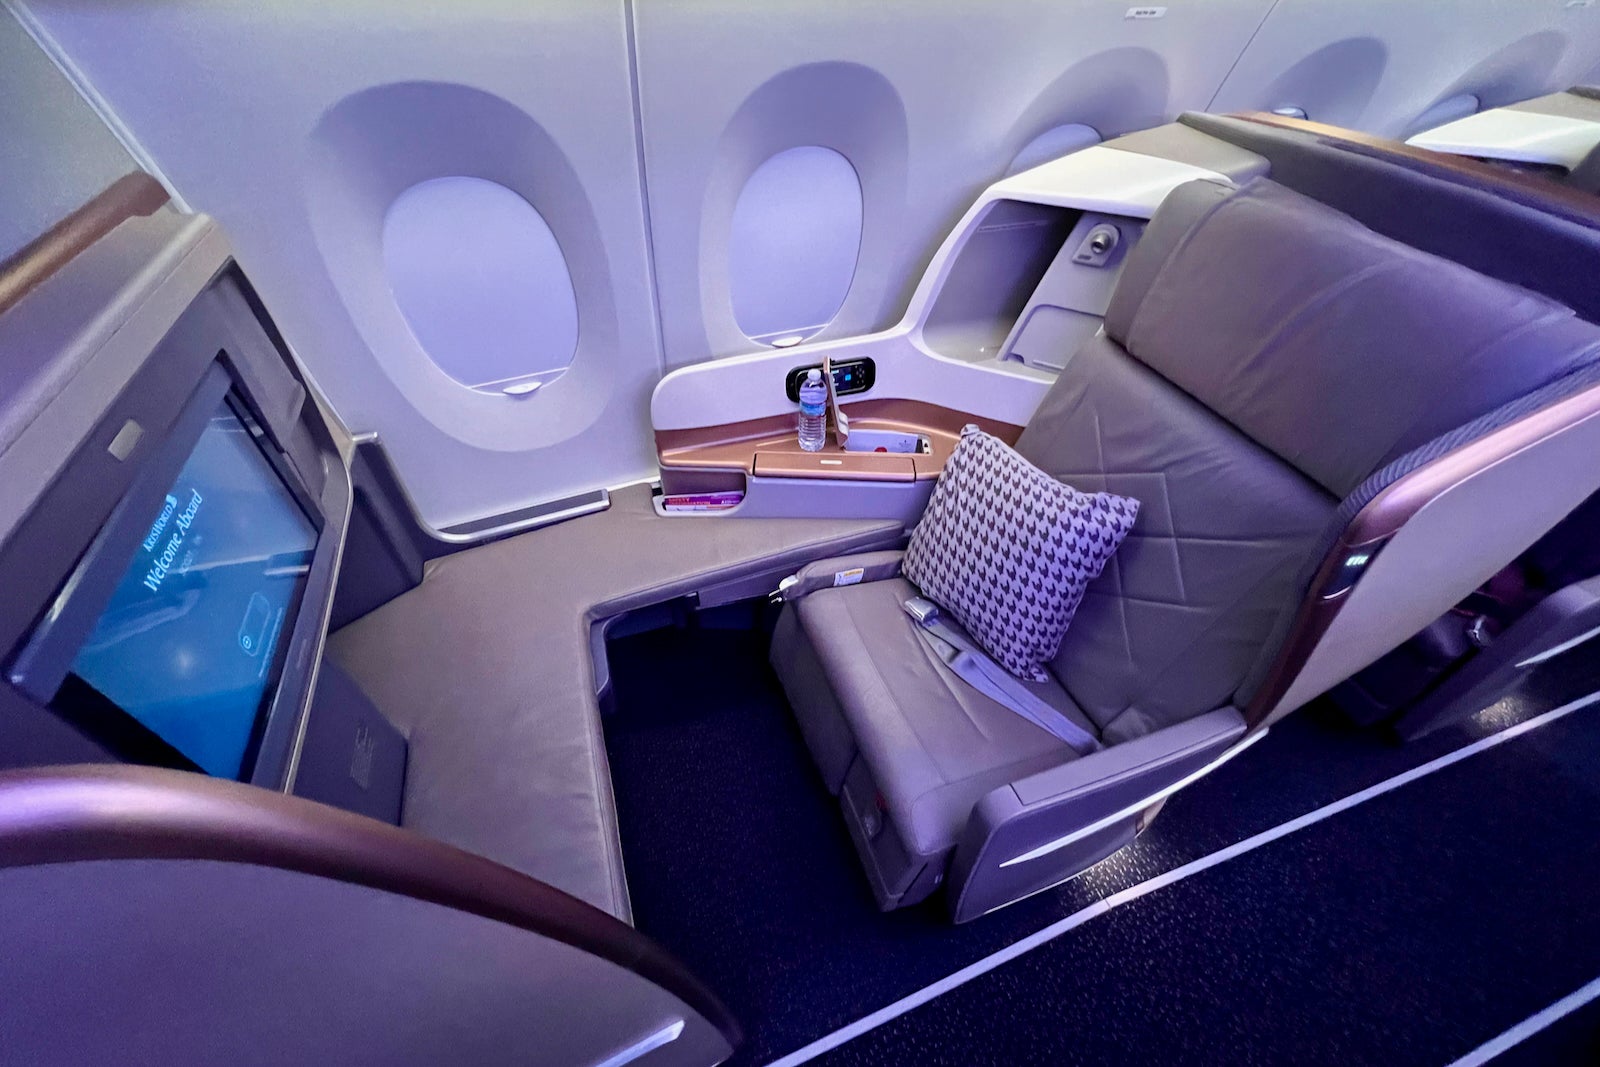 Open award space: You can now book Singapore Airlines business-class awards with..